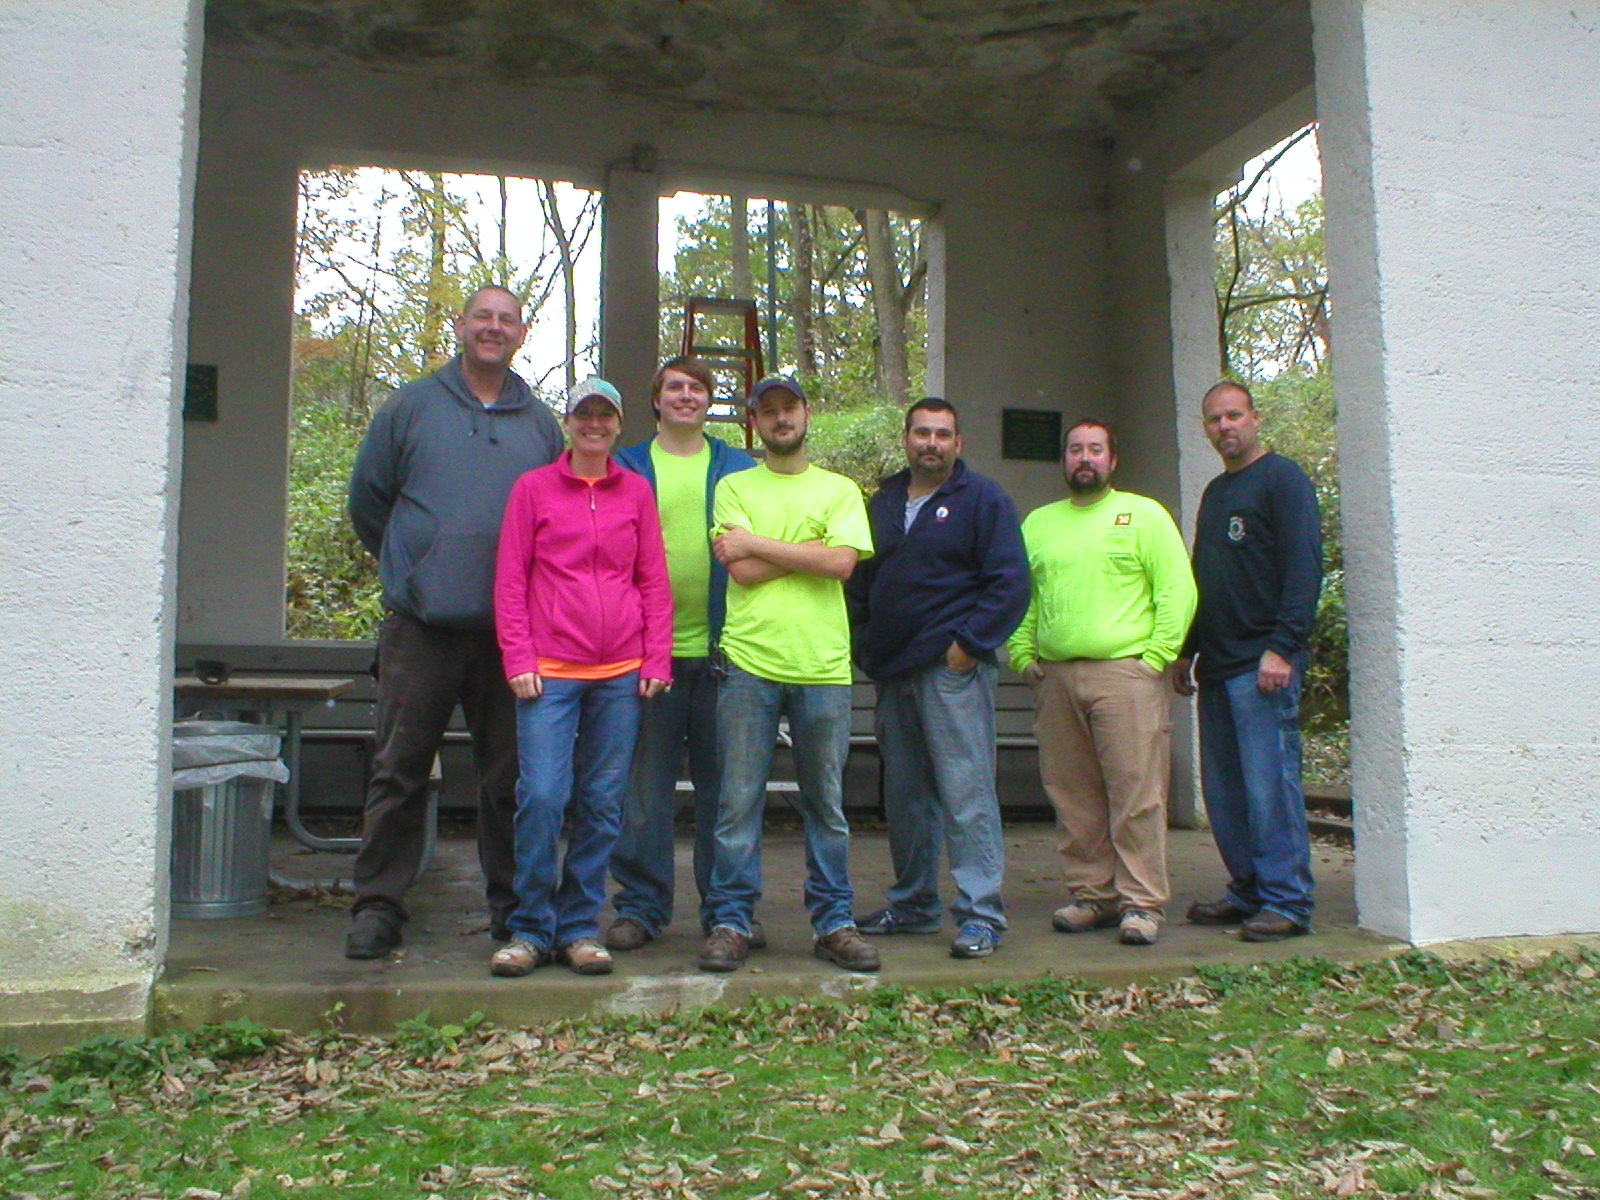 IBEW Local 145 volunteers proudly donated their Saturday morning to this project!</td><td>Street Car pavilion by night!  A beautiful site! Photo: Julie Malake